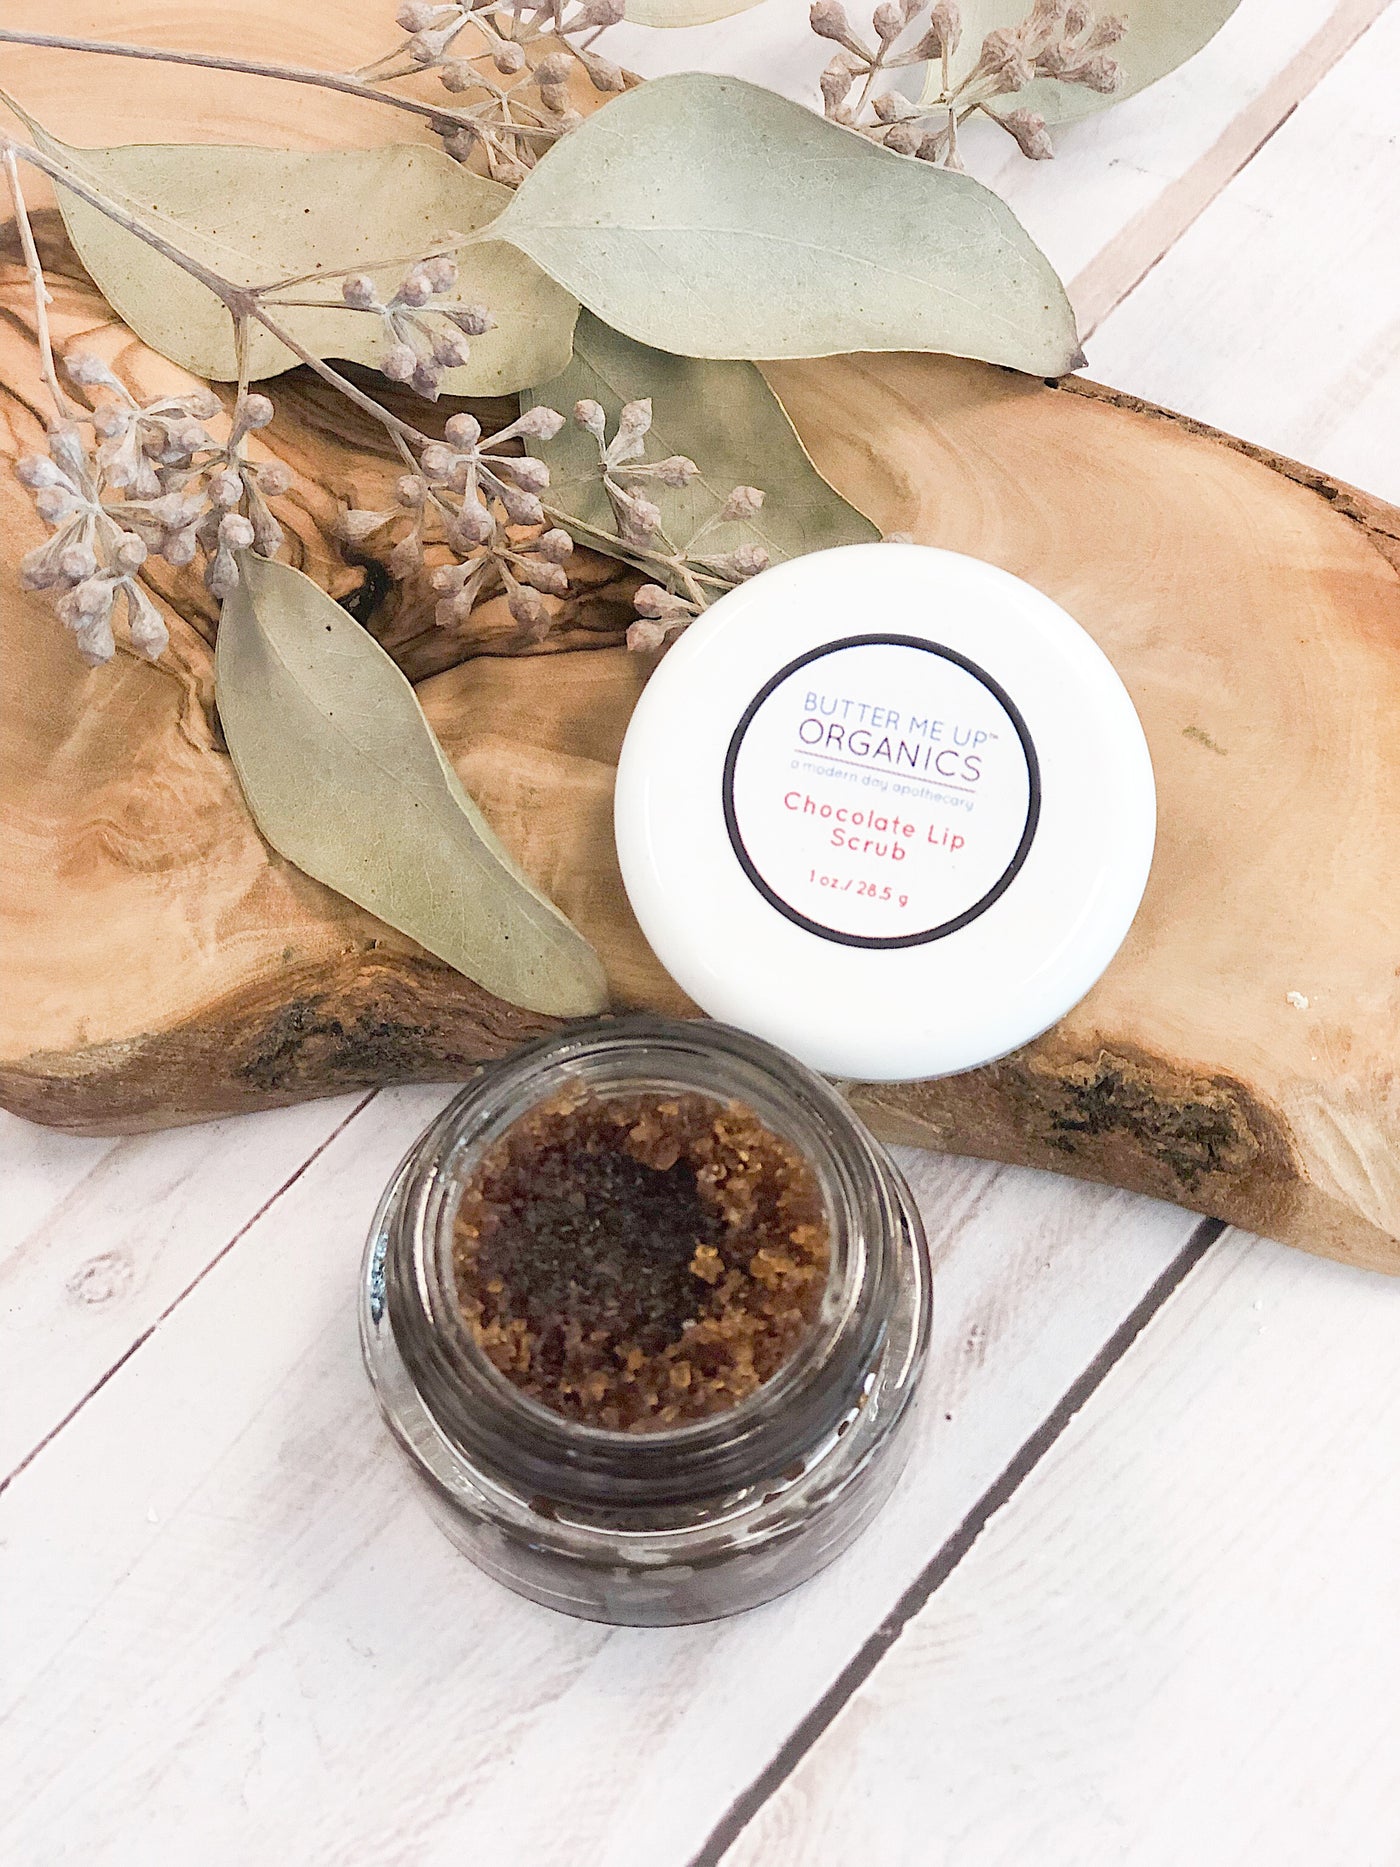 Organic Vegan Cruelty-Free Chocolate Lip Scrub For Flaky Chapped Lips - Roses & Chains | Fashionable Clothing, Shoes, Accessories, & More